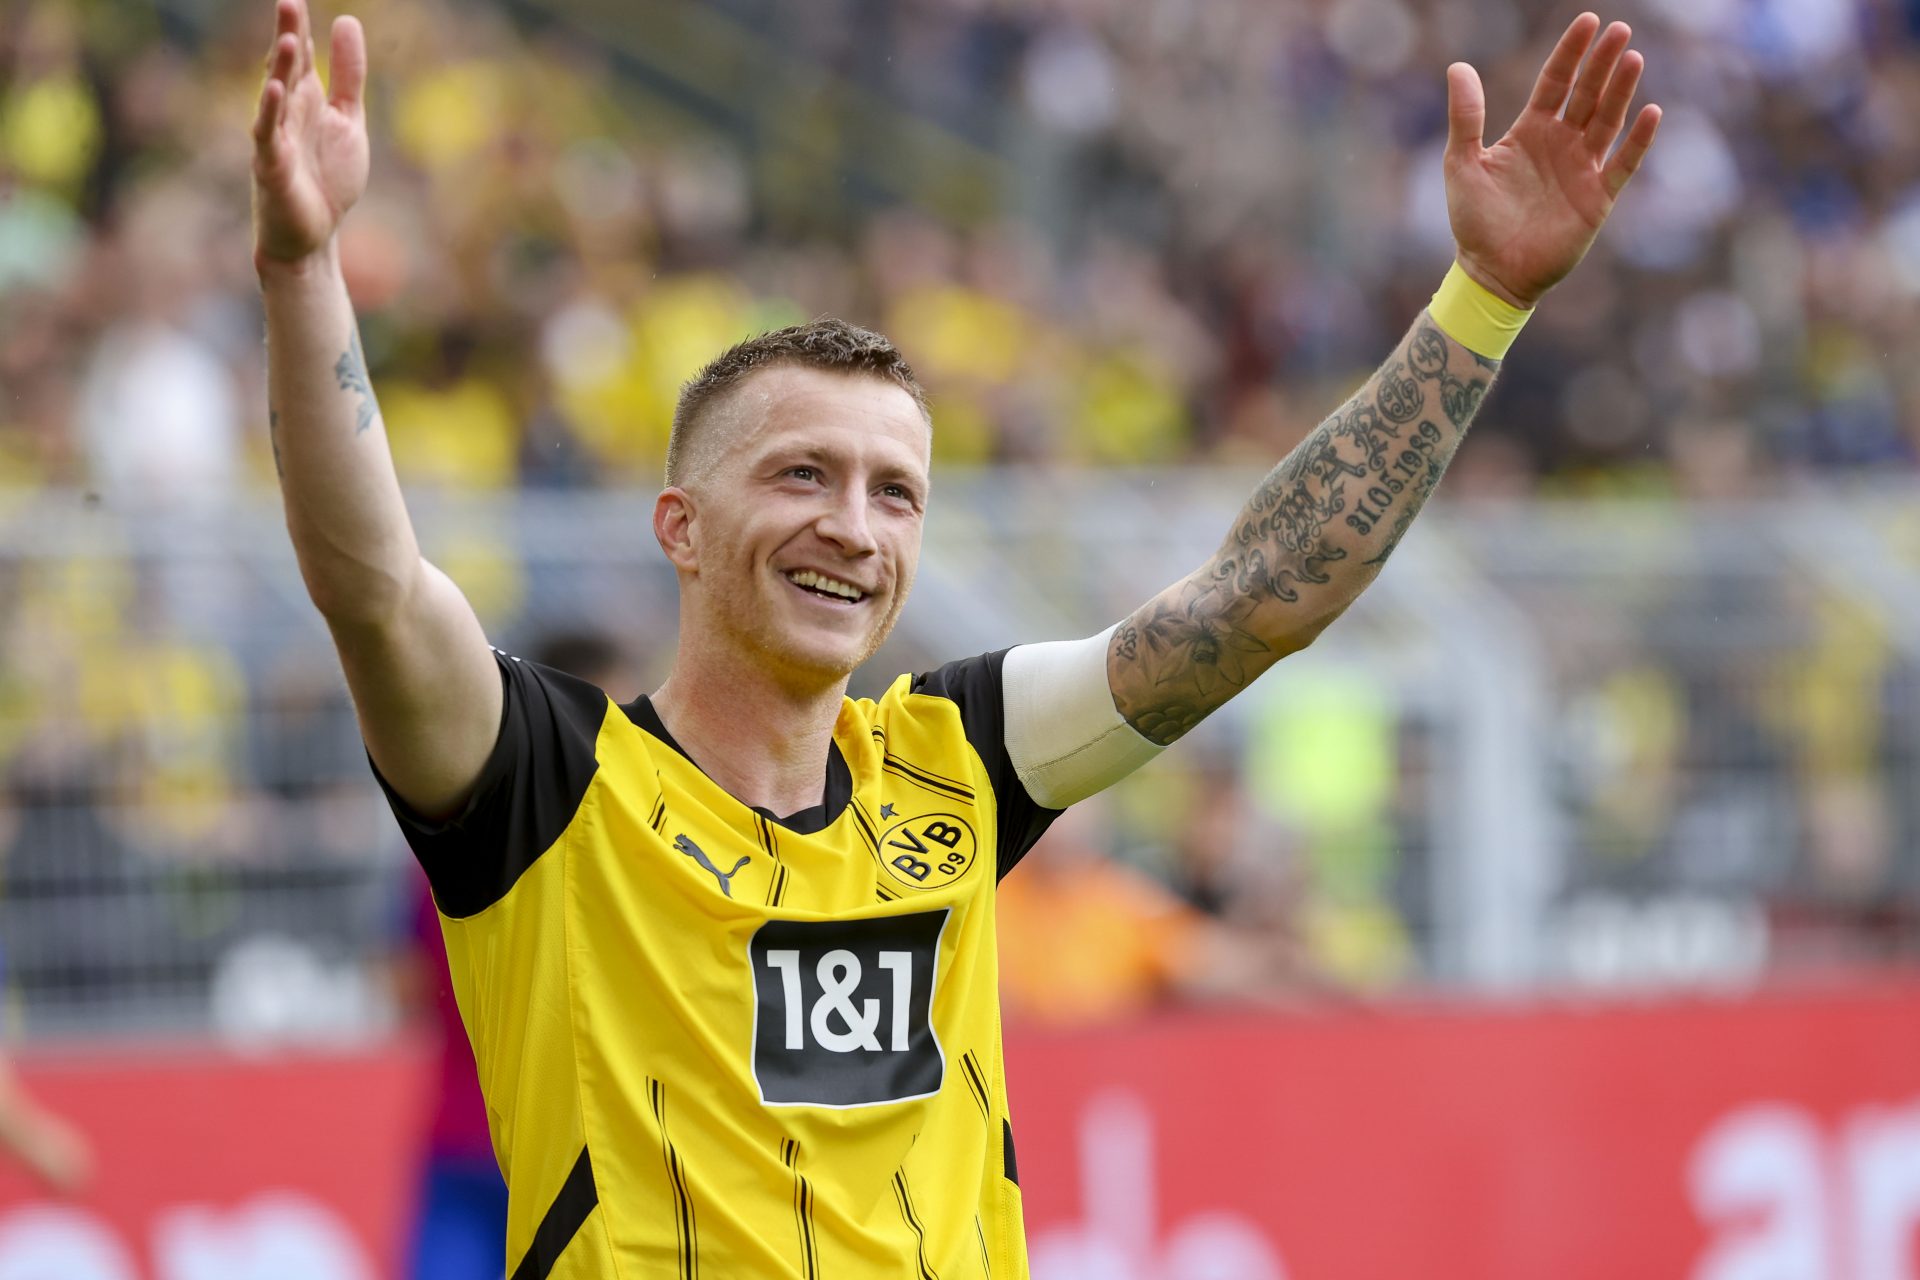 Farewell to a legend! Marco Reus' final game for Dortmund is the Champions League final